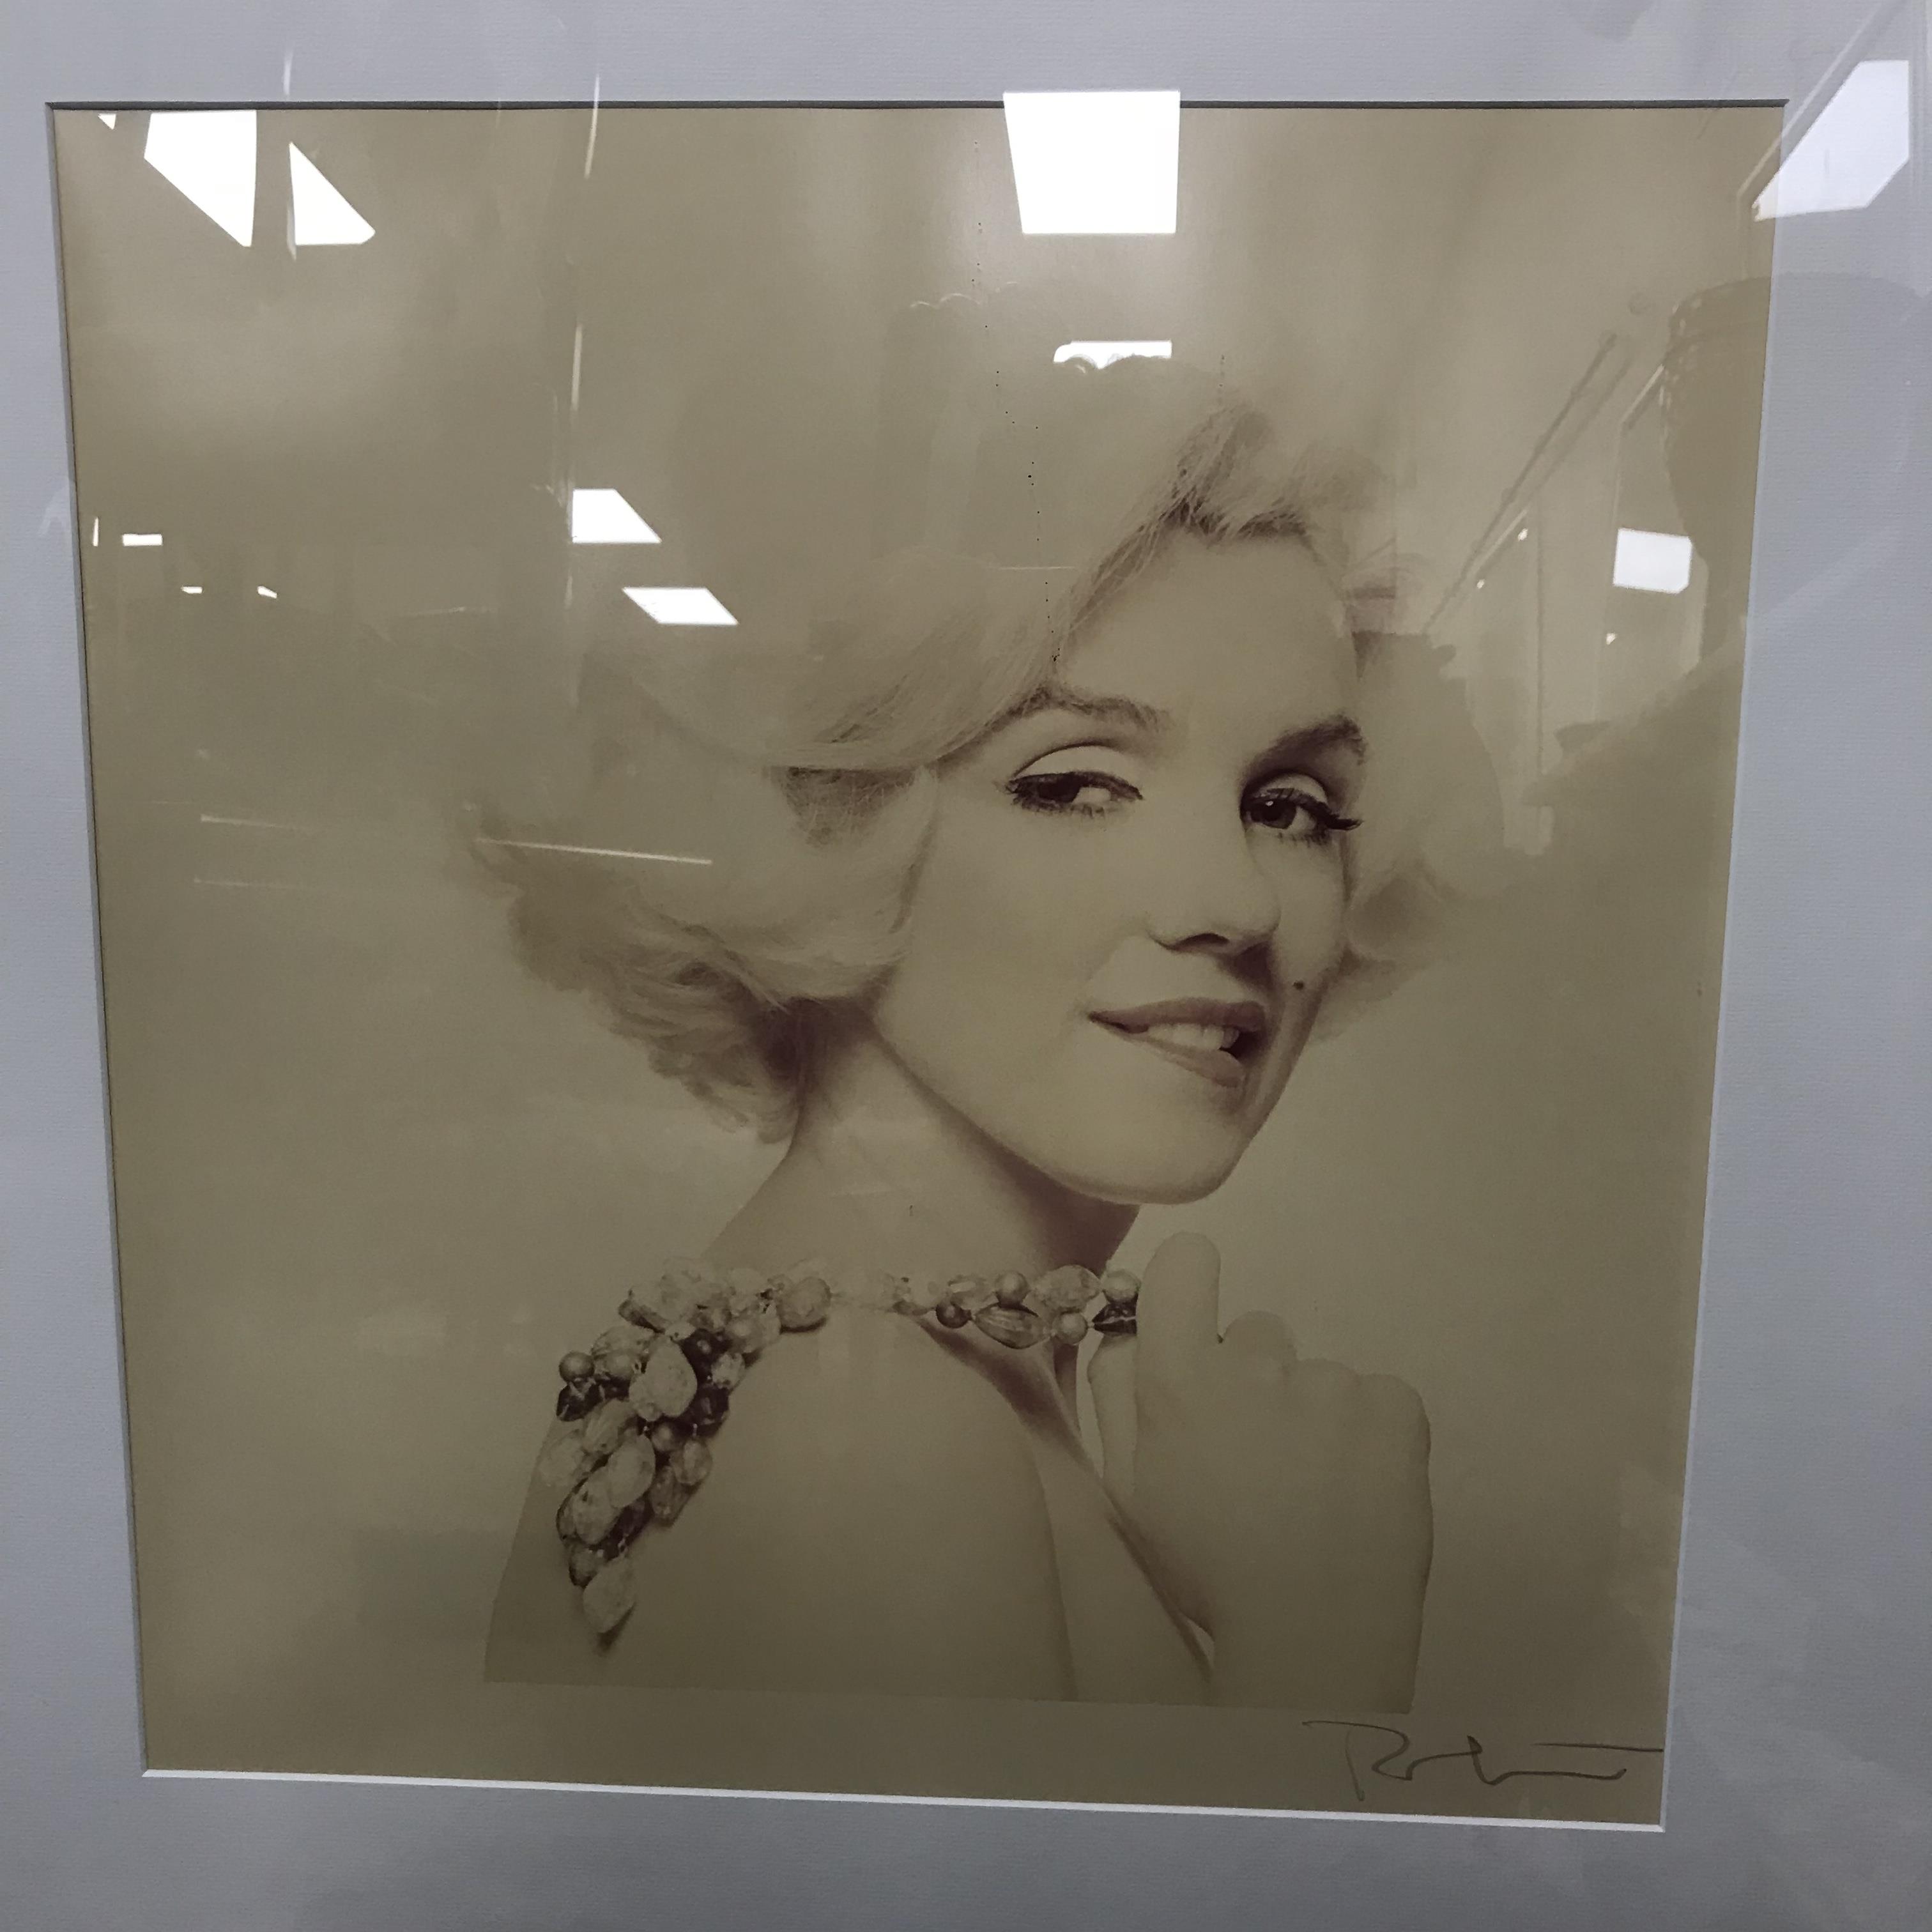 BERT STERN "Marilyn with bead necklace" limited edition photographic print from the last sitting - Image 36 of 38